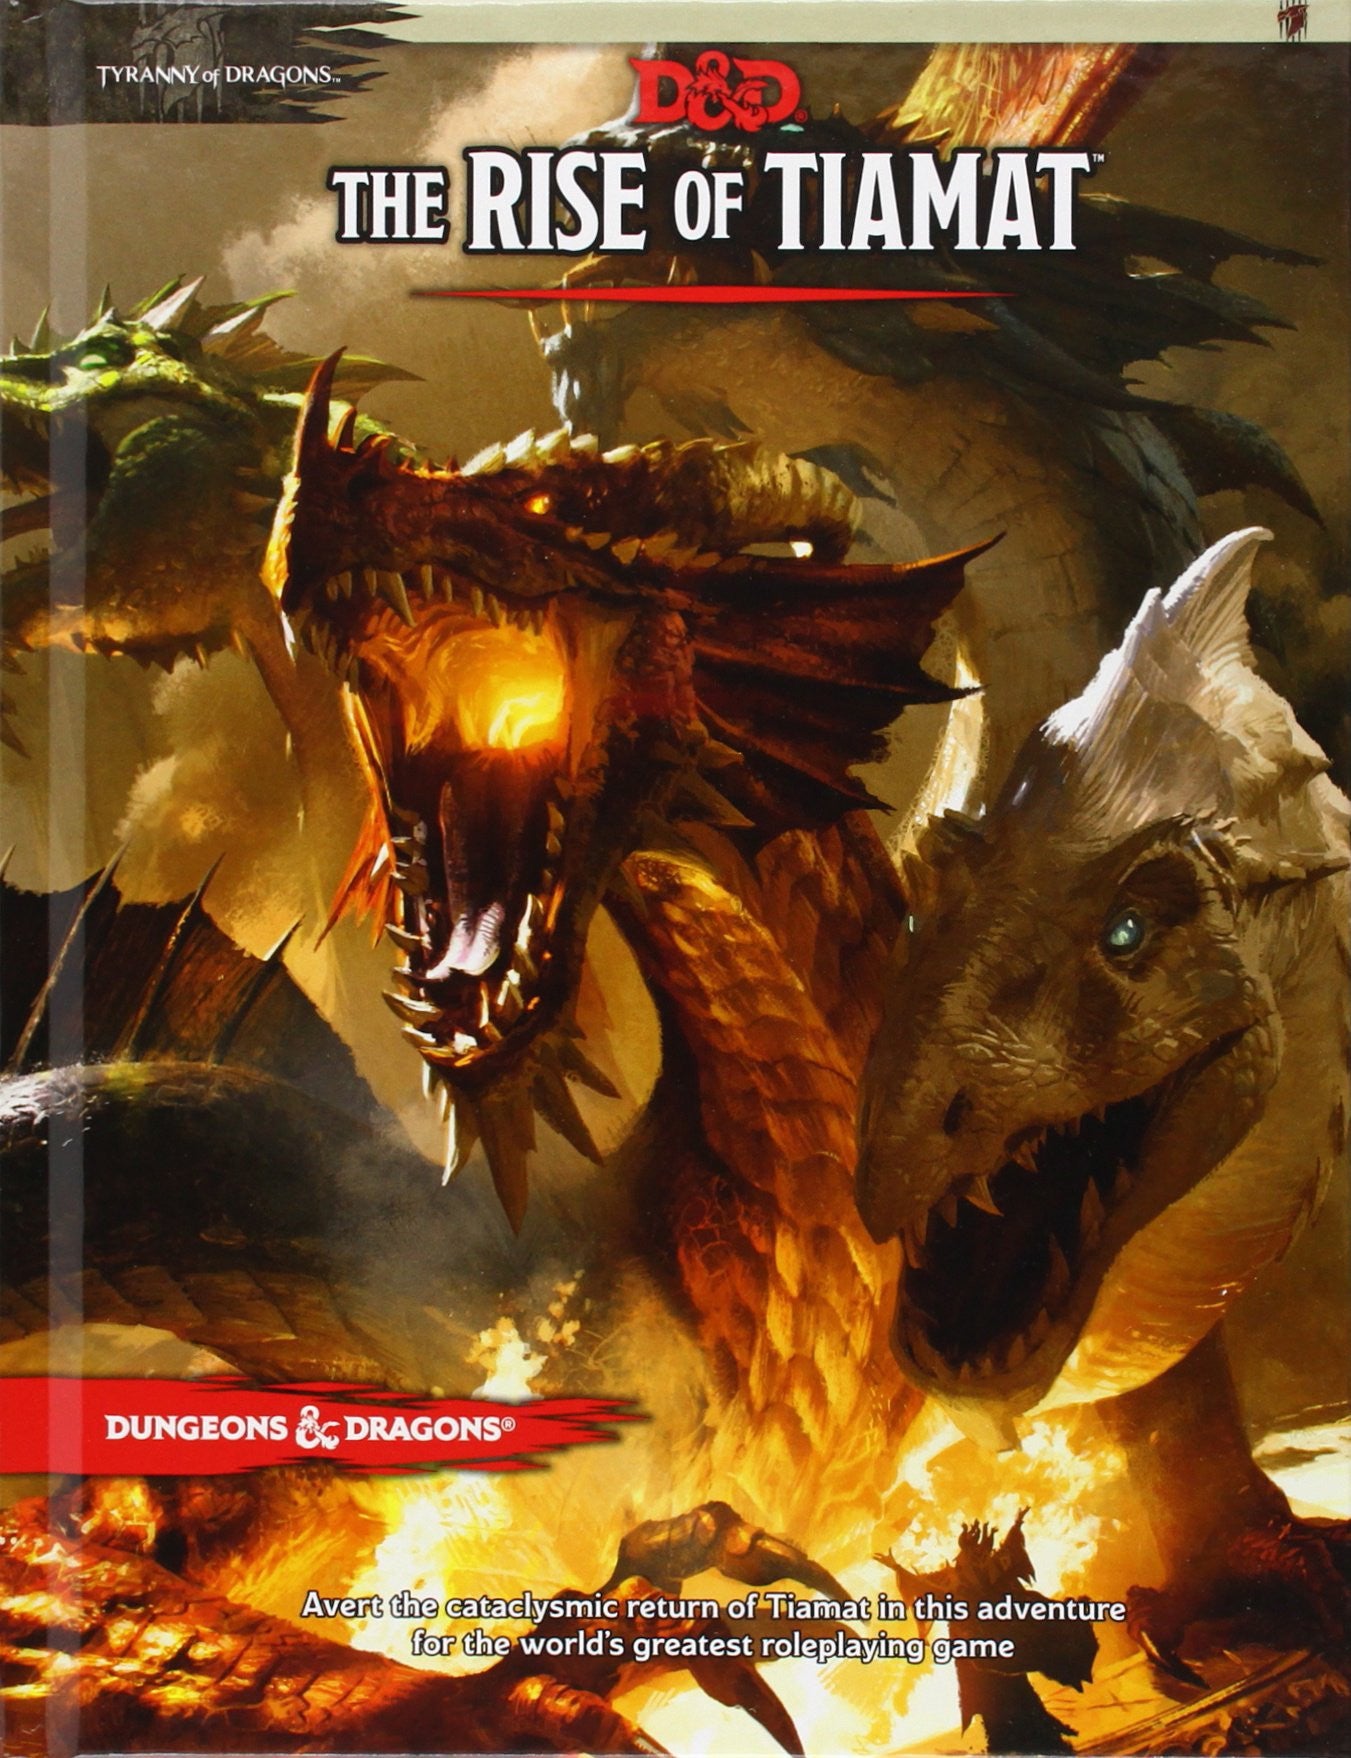 Dungeons and Dragons: The Rise of Tiamat